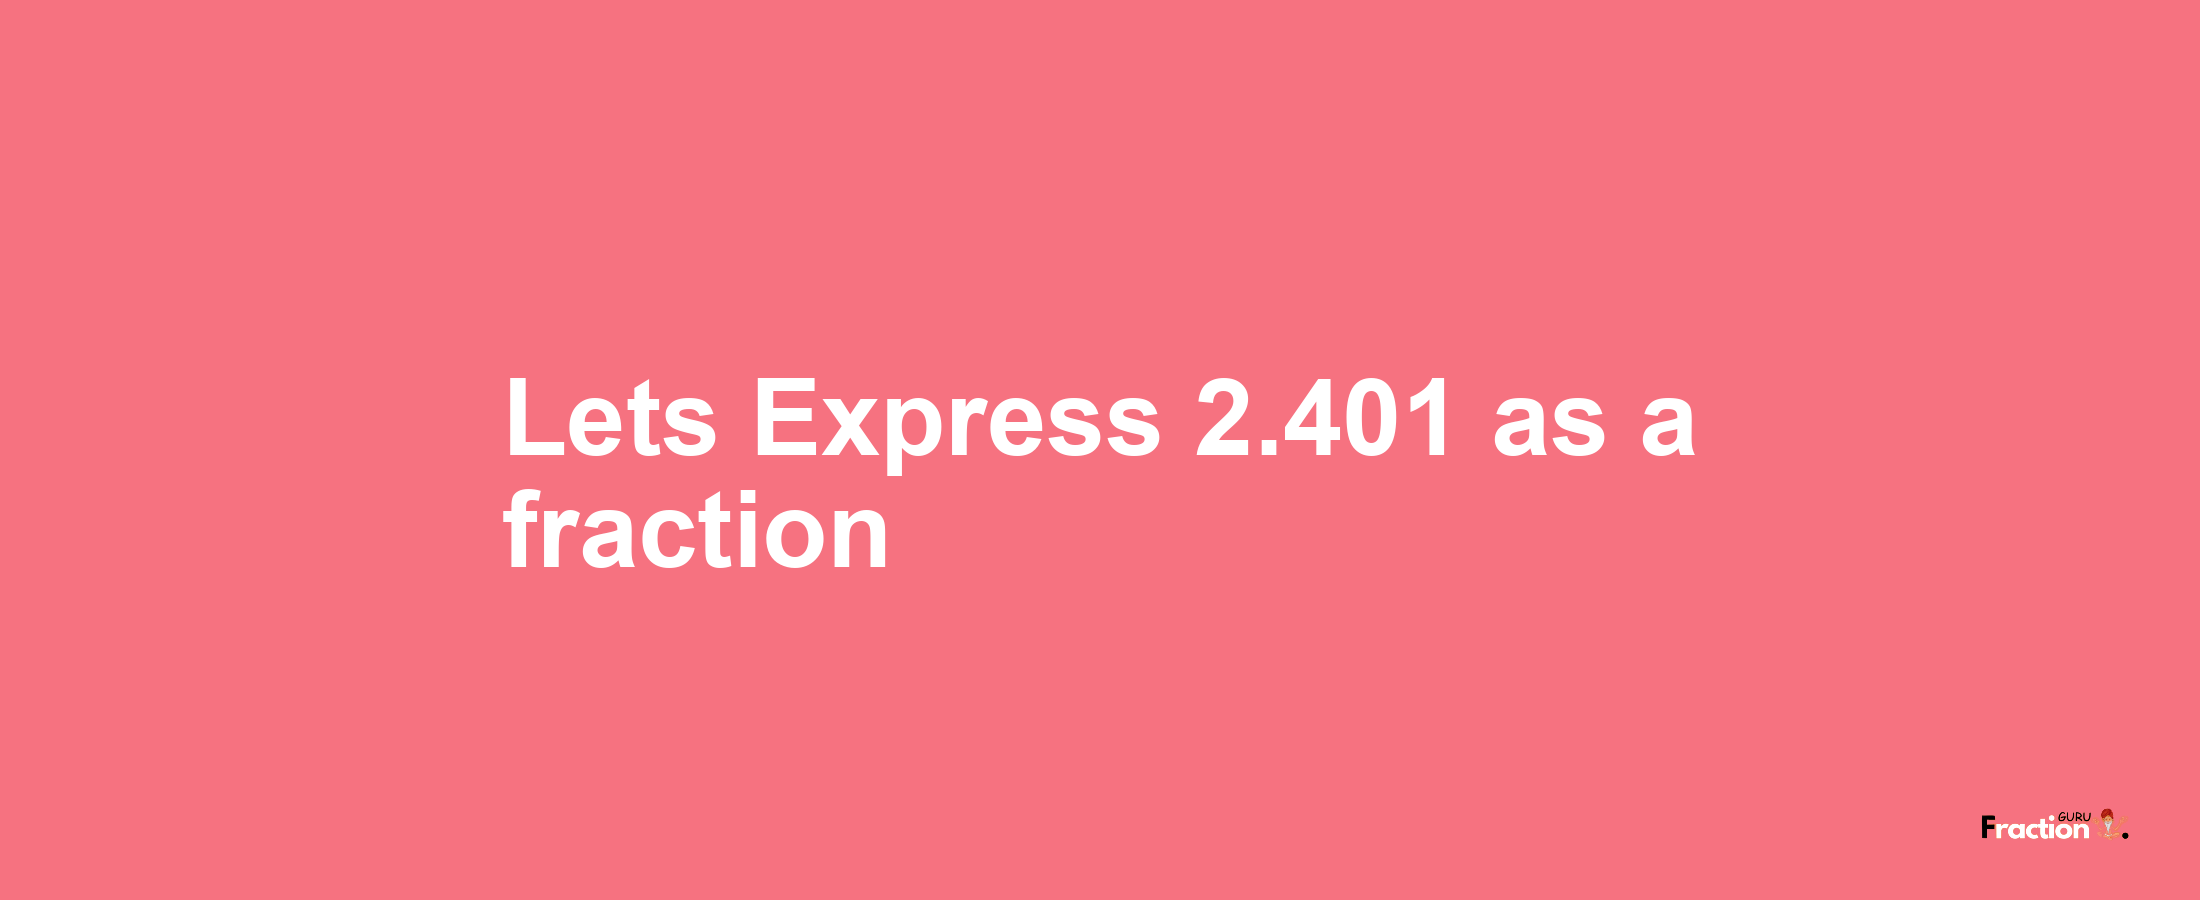 Lets Express 2.401 as afraction